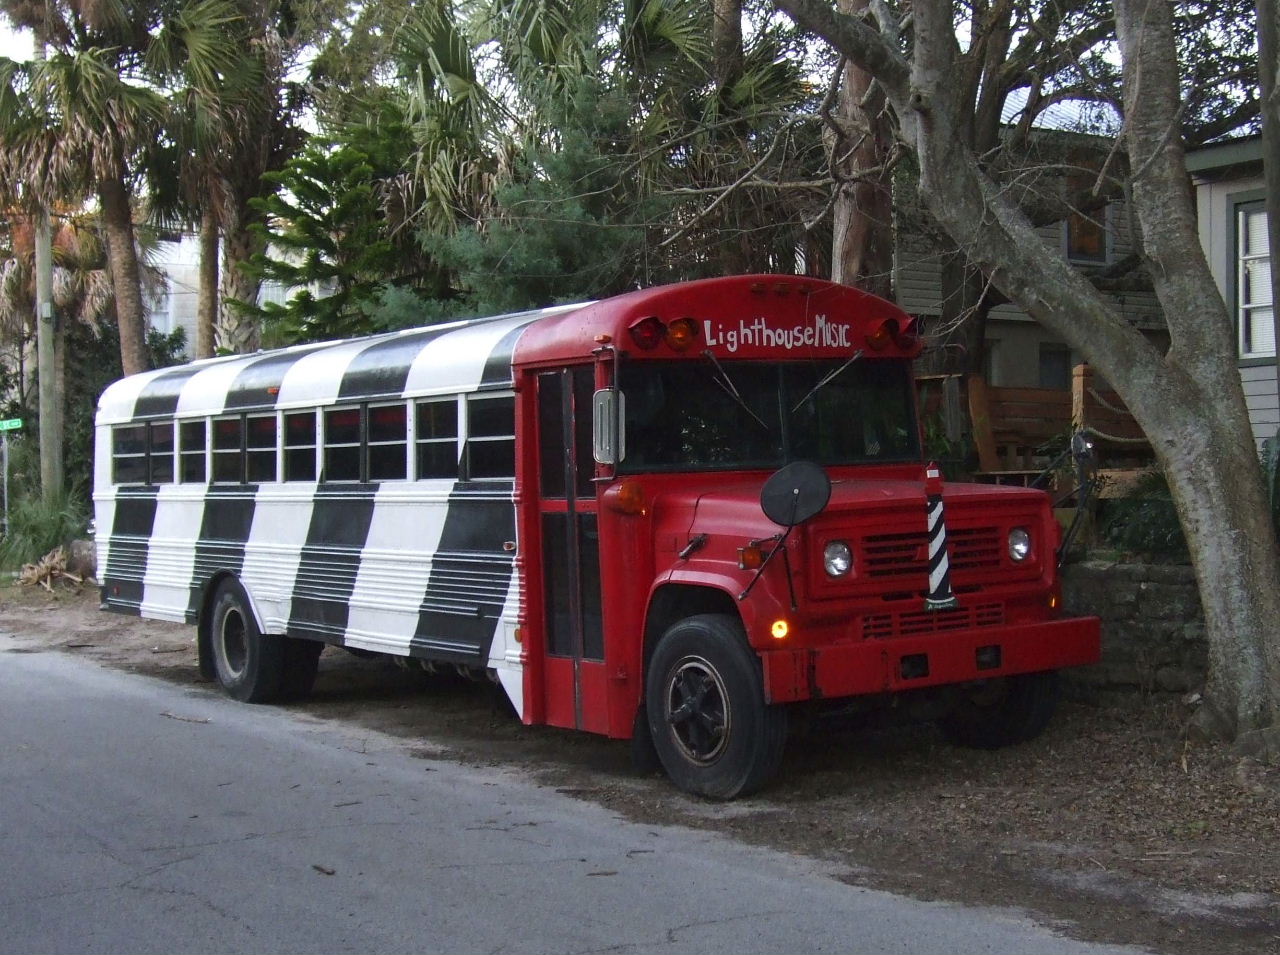 Bus painted to match the St Augustine lighthouse